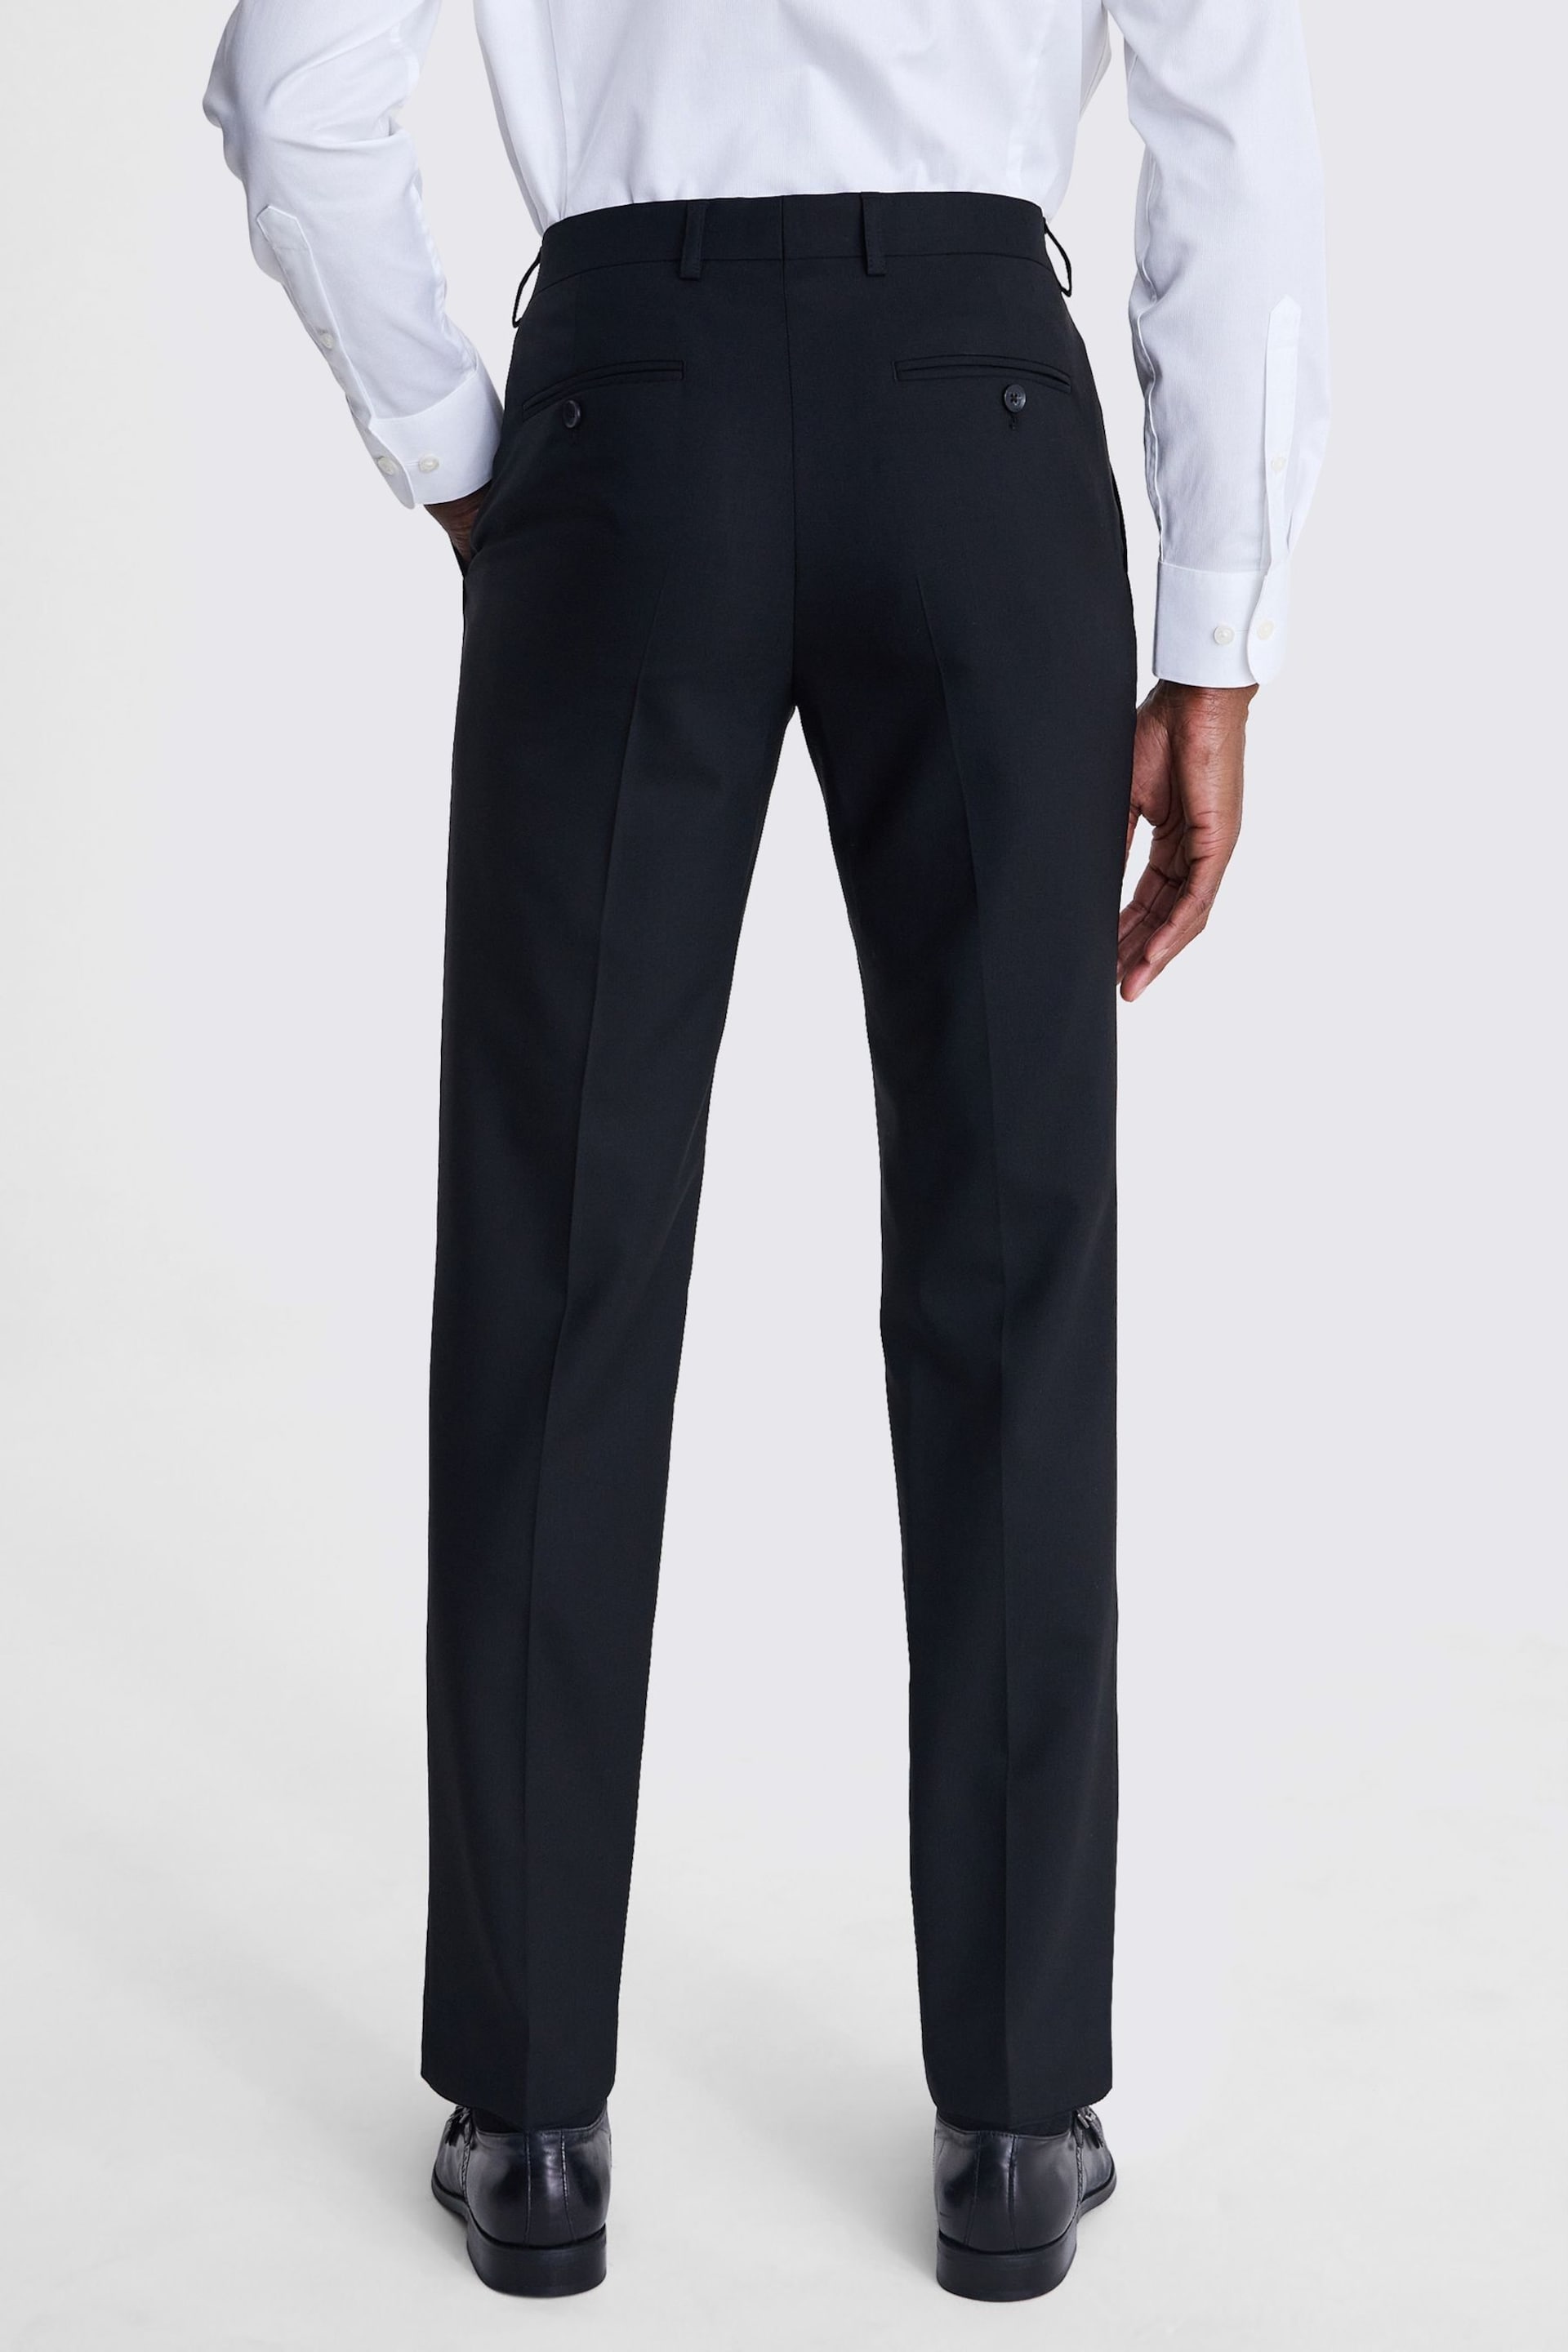 Tailored Fit Black Half Lined Trousers - Image 2 of 3